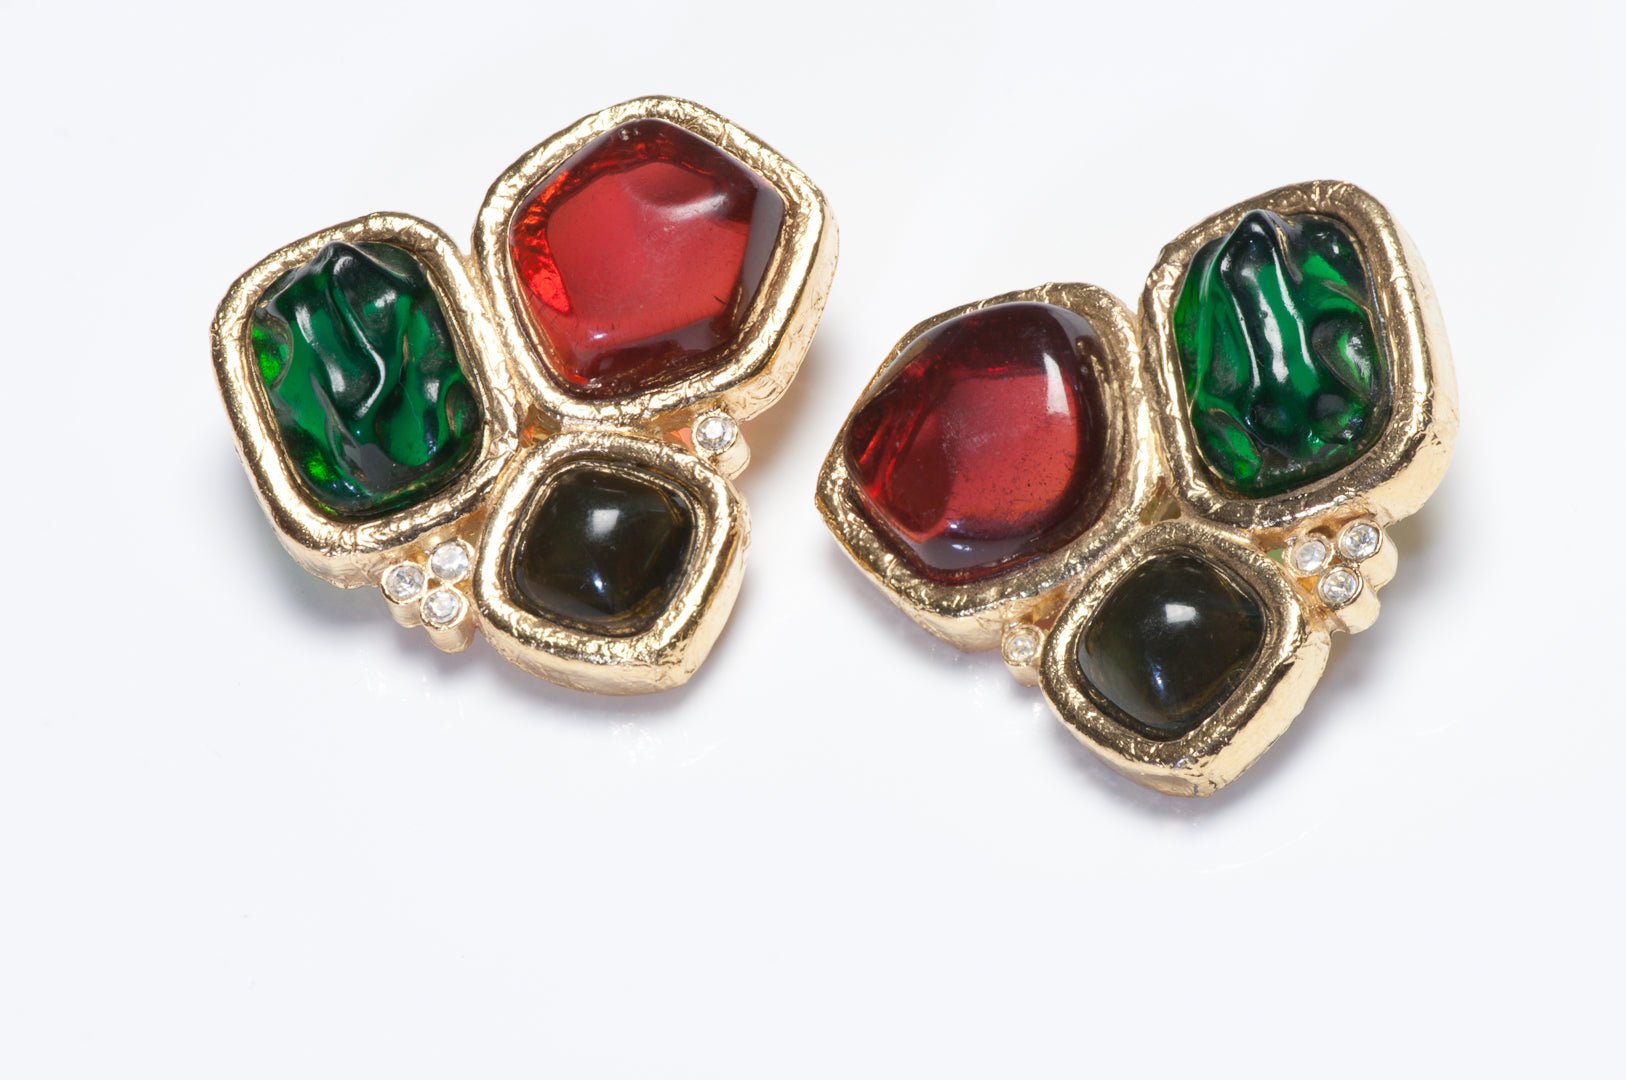 Vintage Givenchy Paris Red Green Cabochon Crystal Charm Brooch Earrings Set